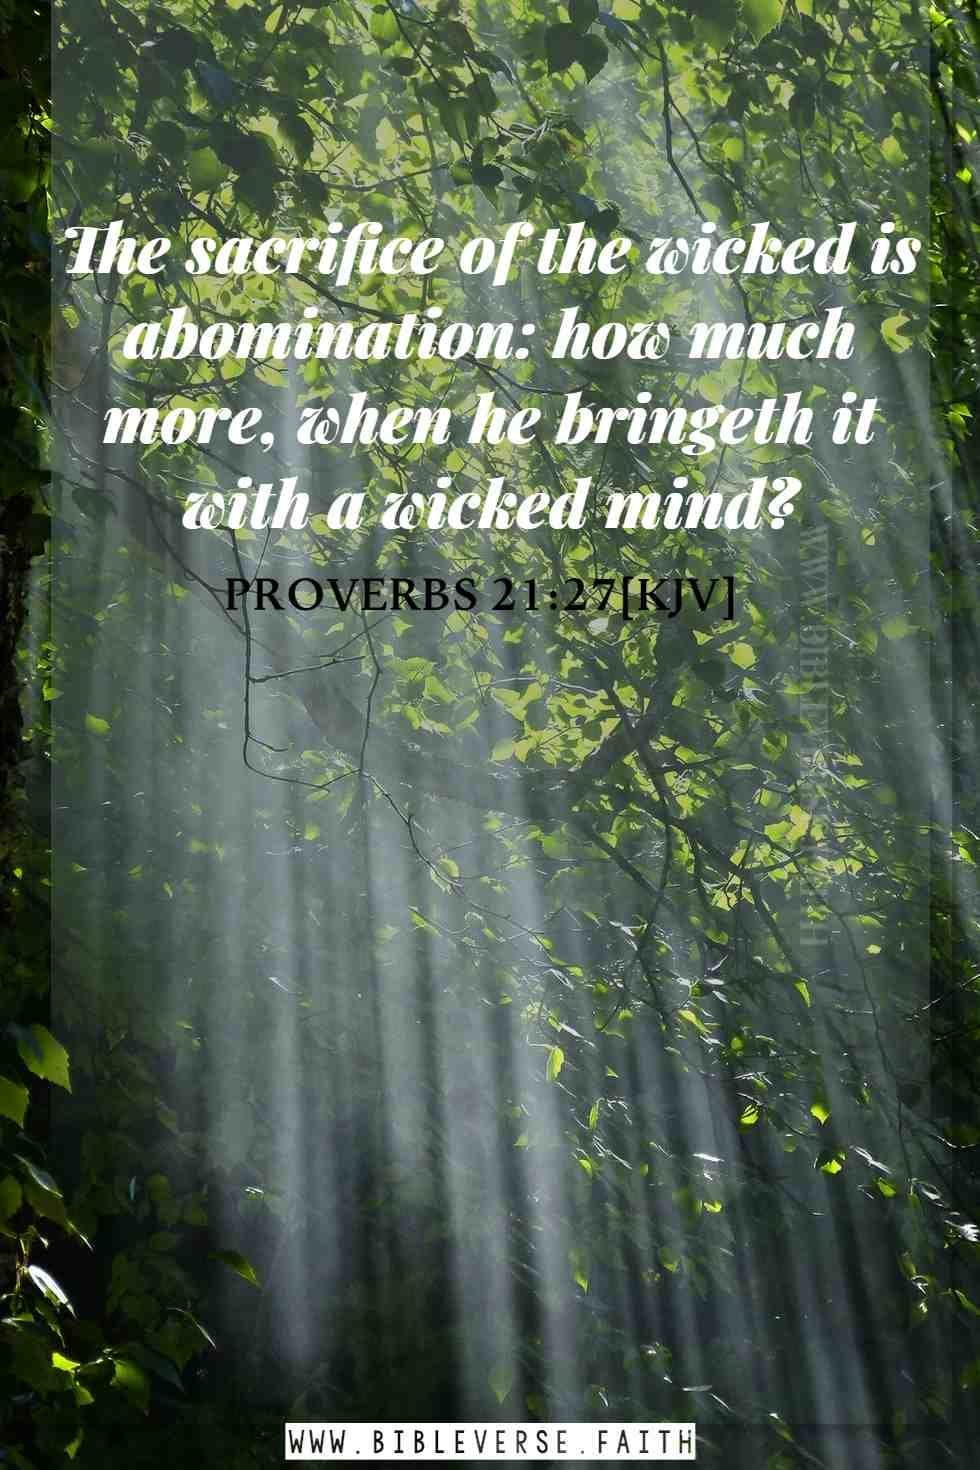 proverbs 21 27[kjv] abomination in the bible